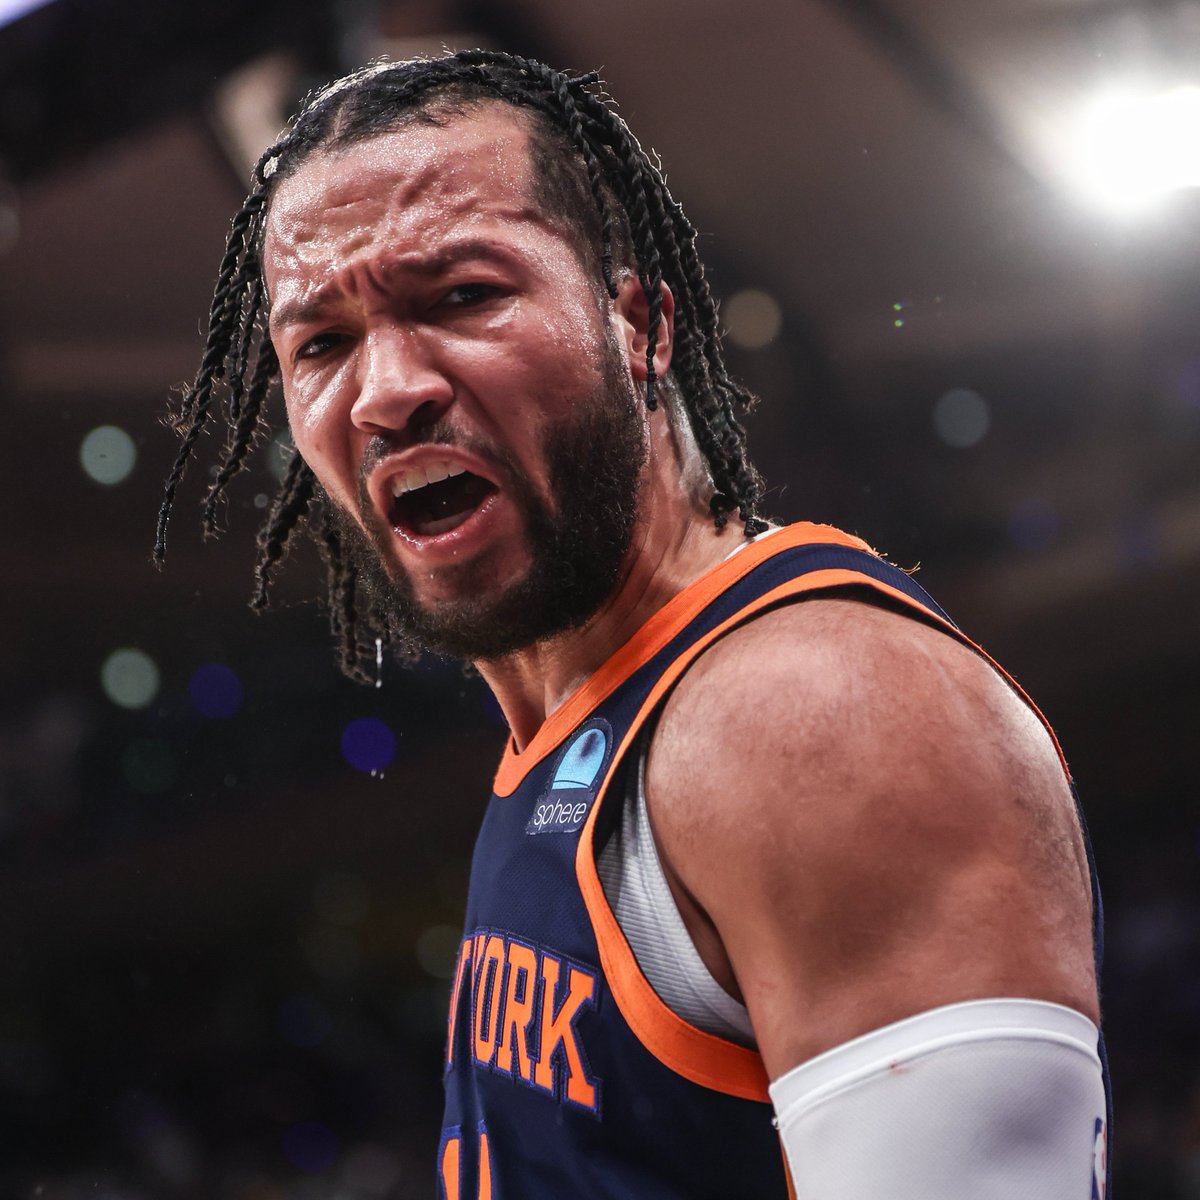 Some members of the Knicks' organization are upset with how Jalen Brunson is being officiated in the Pacers series, per @IanBegley They feel he is 'being grabbed and hit up and down the floor and it's gone unnoticed by the refs'